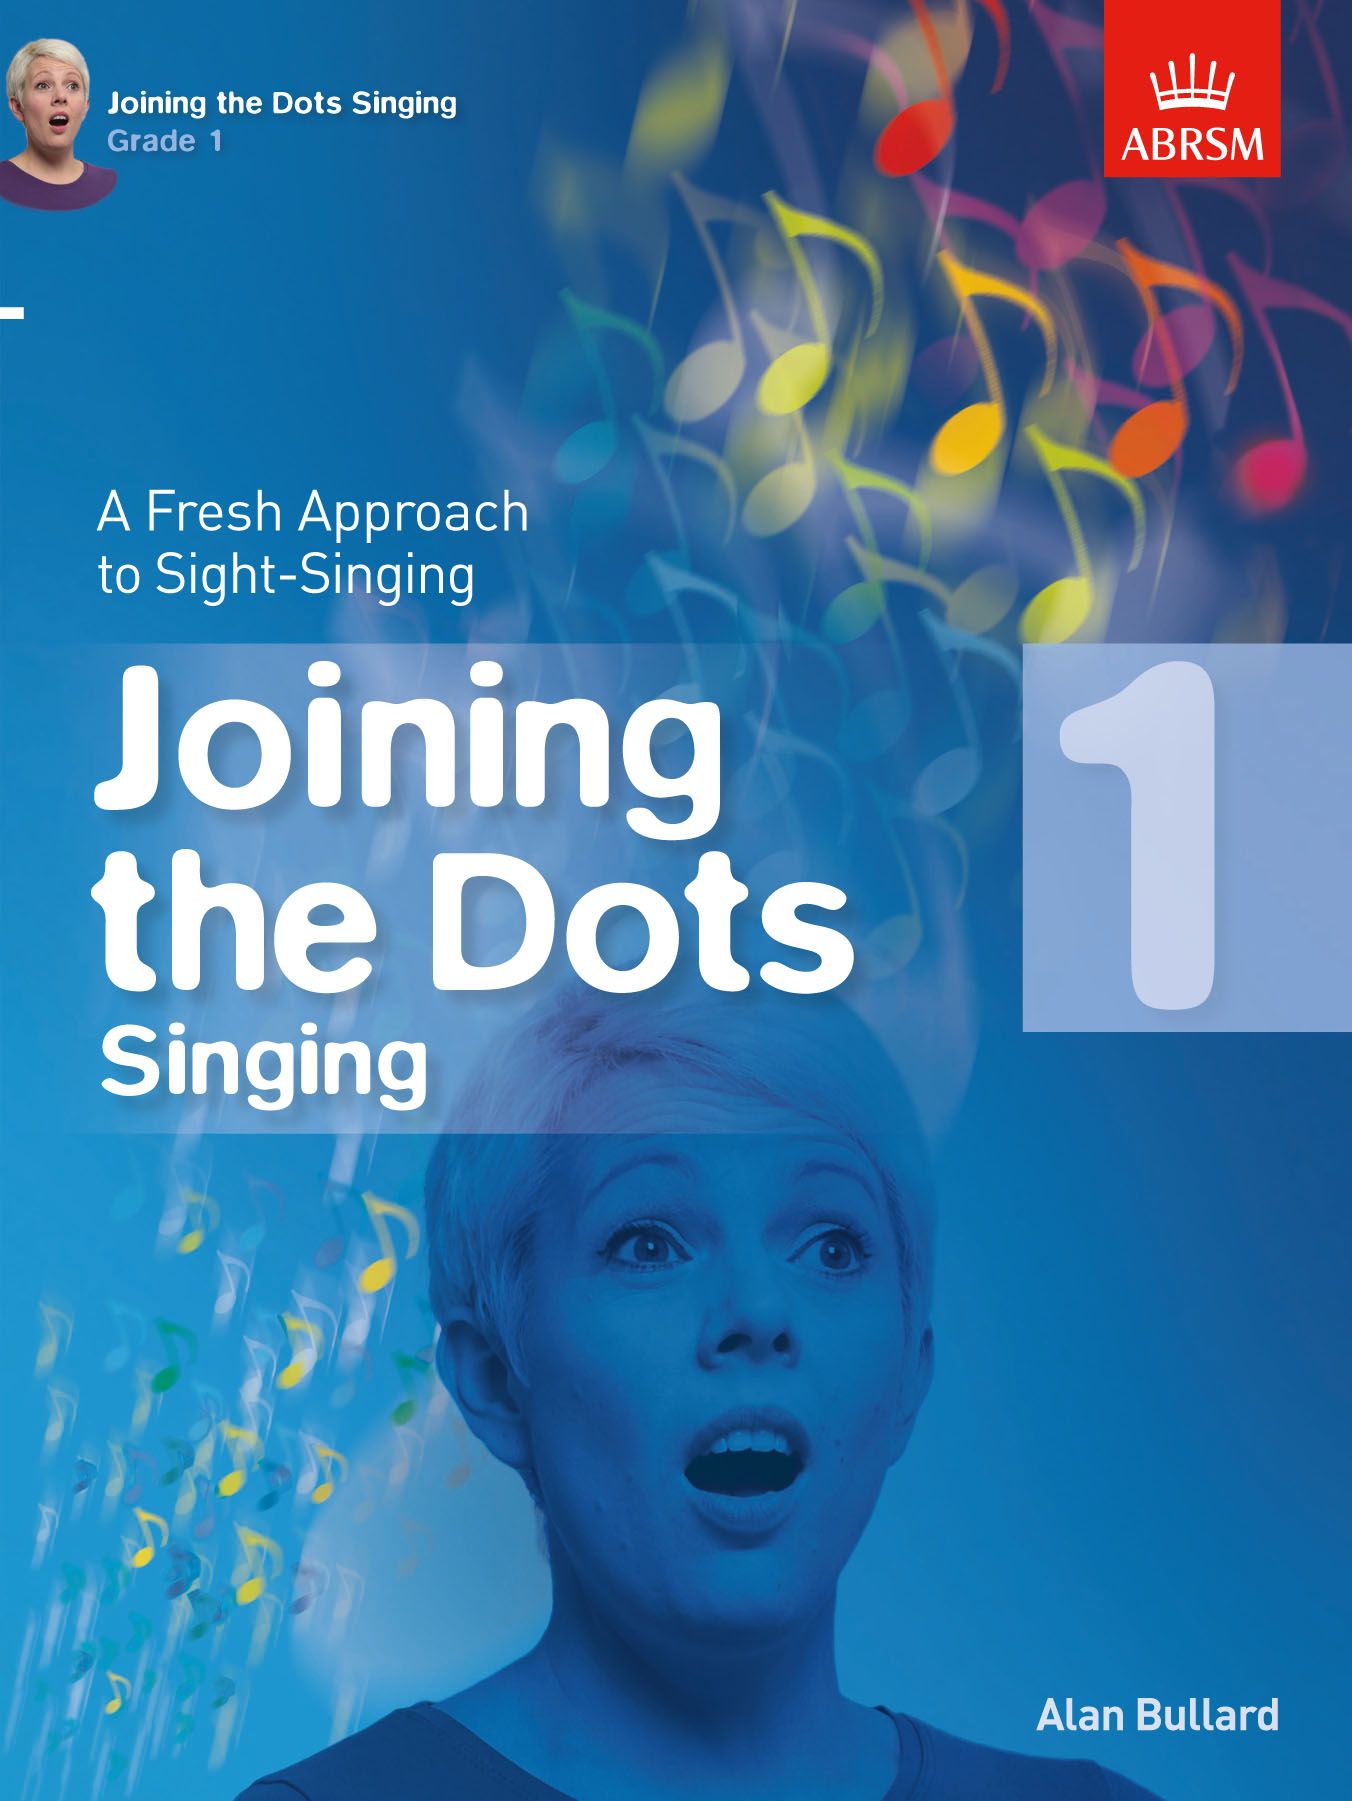 Joining the Dots for Singing G1